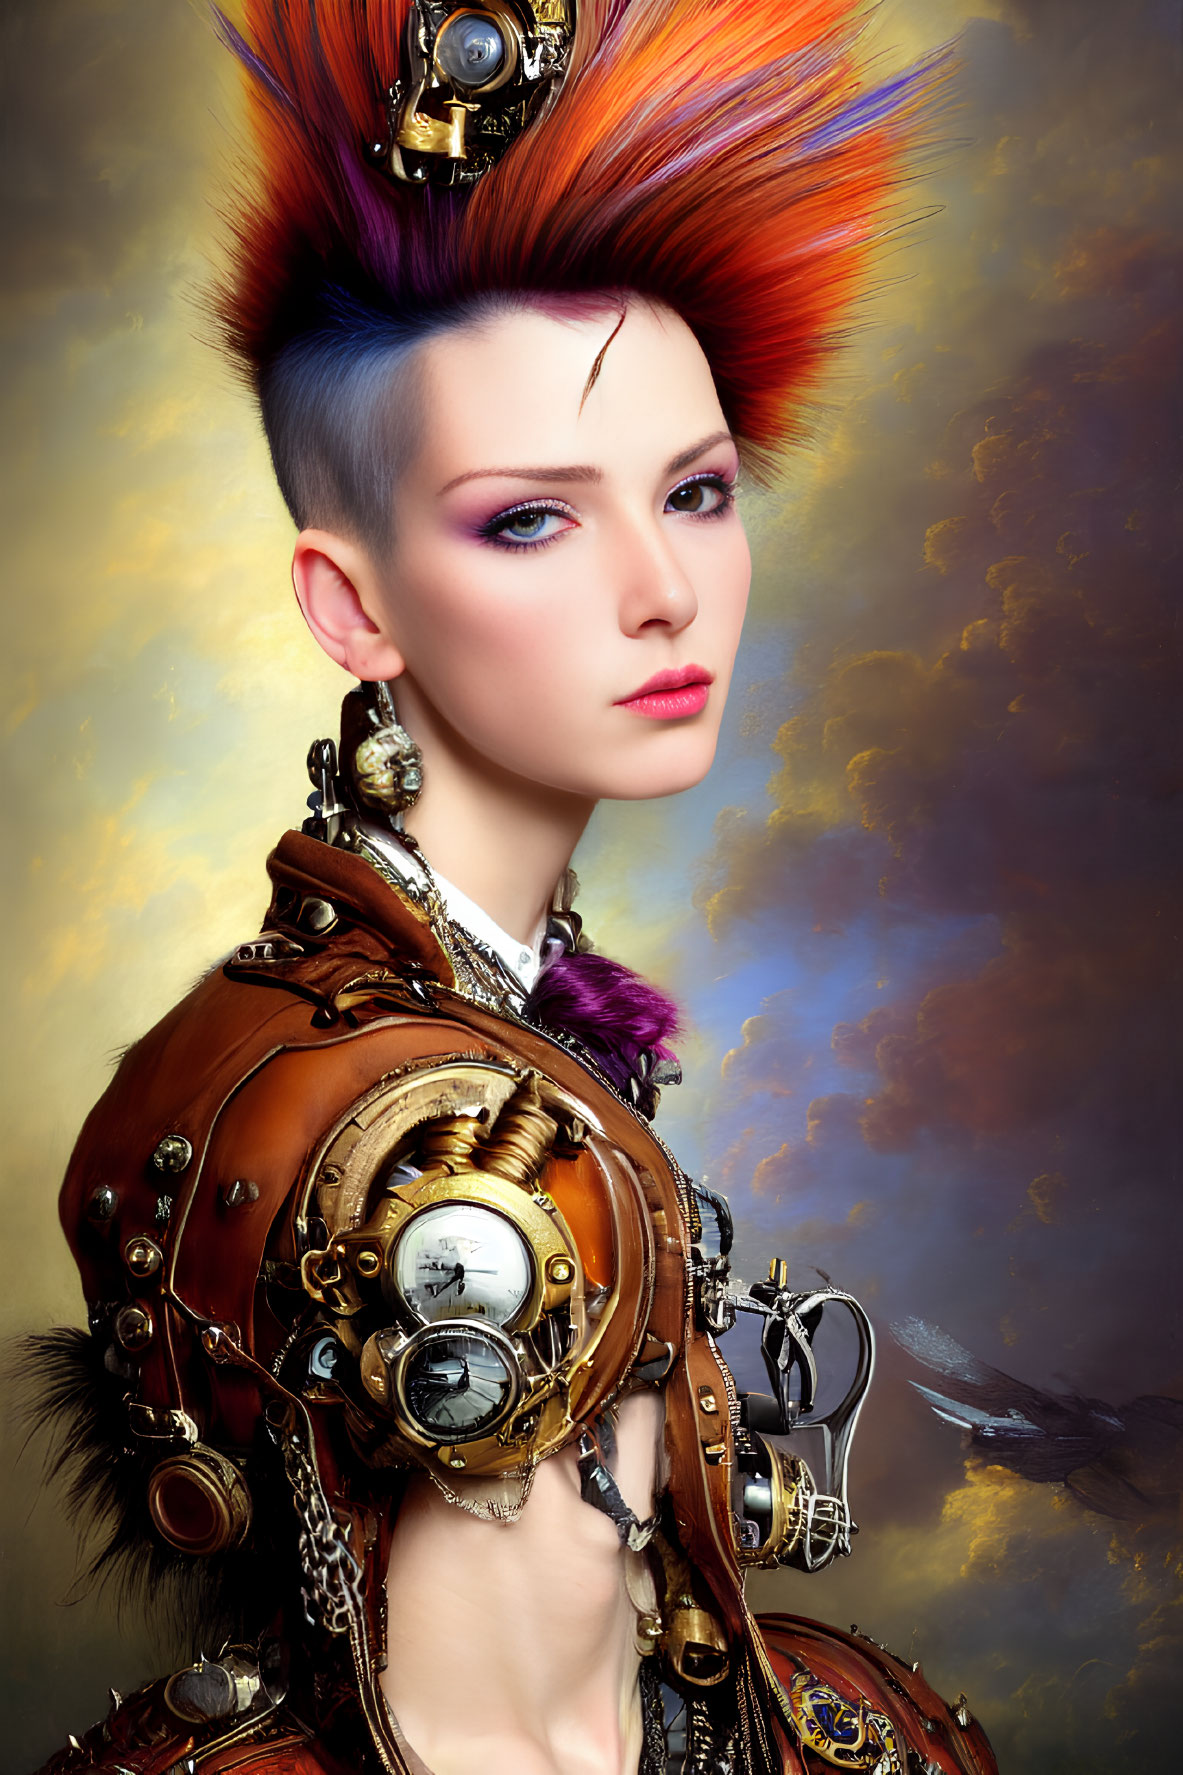 Colorful Mohawk and Steampunk Gear Shoulder Piece